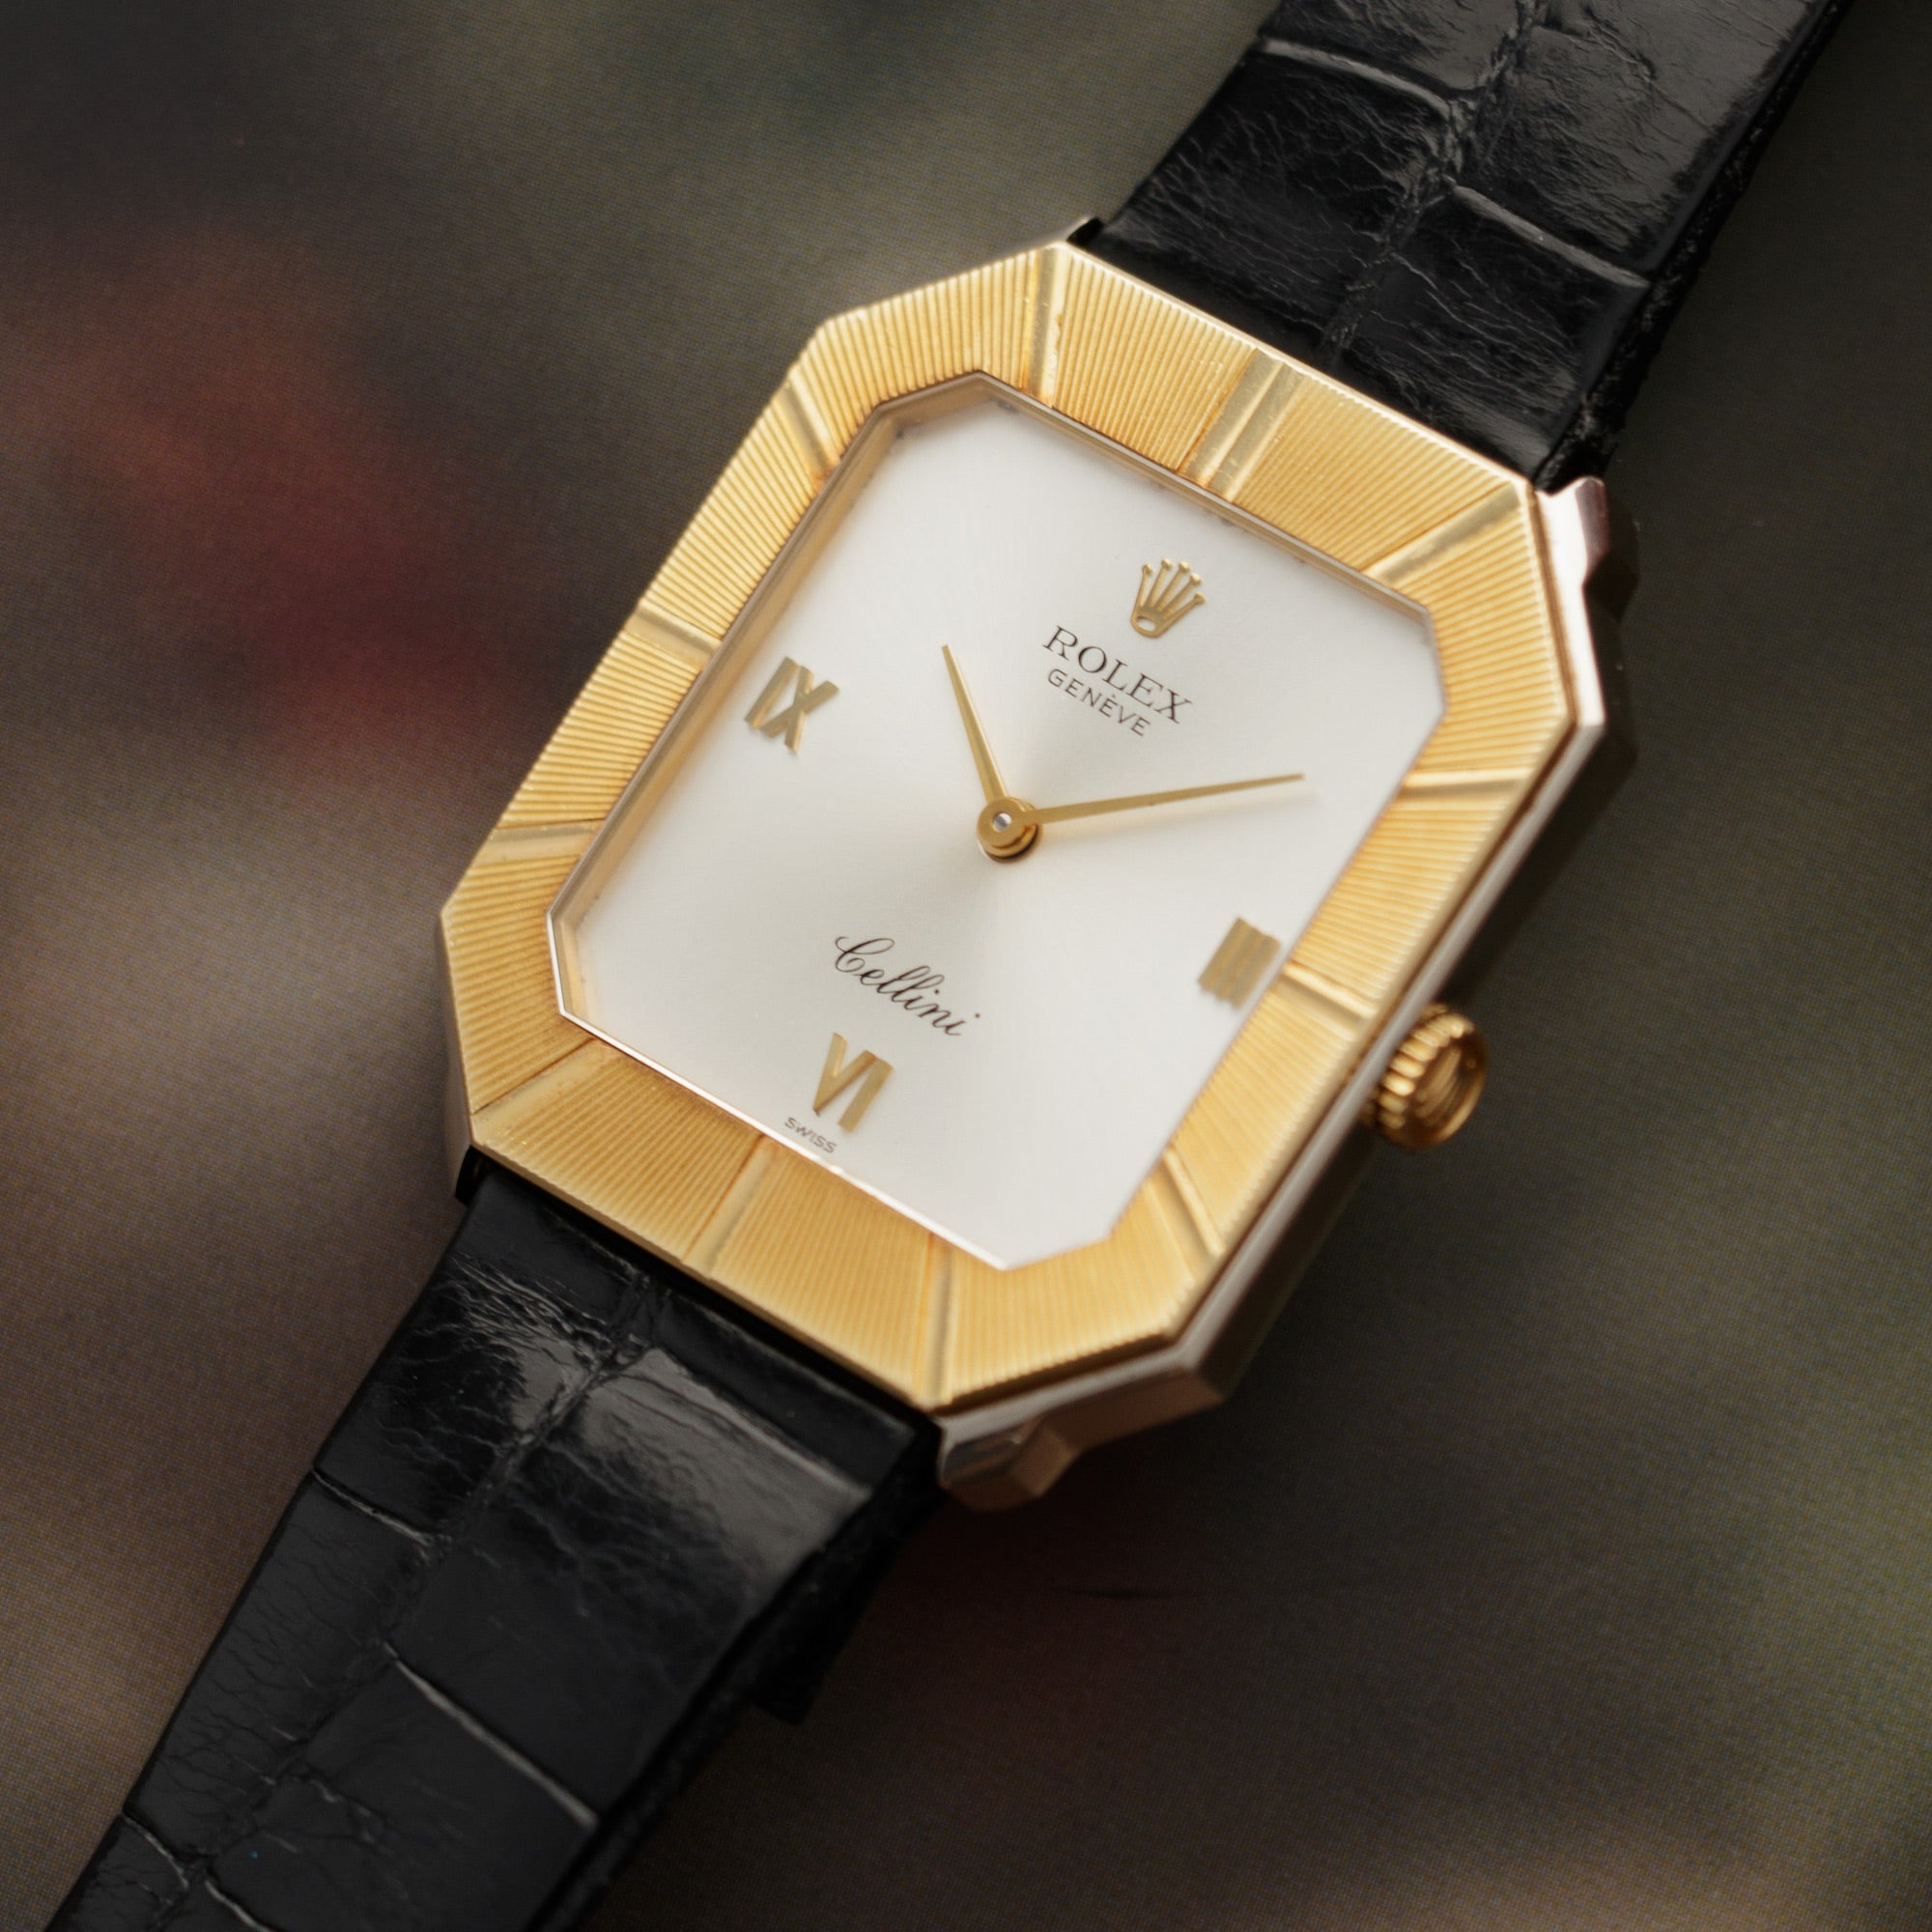 Rolex - Rolex White and Yellow Gold Cellini Ref. 4150 - The Keystone Watches